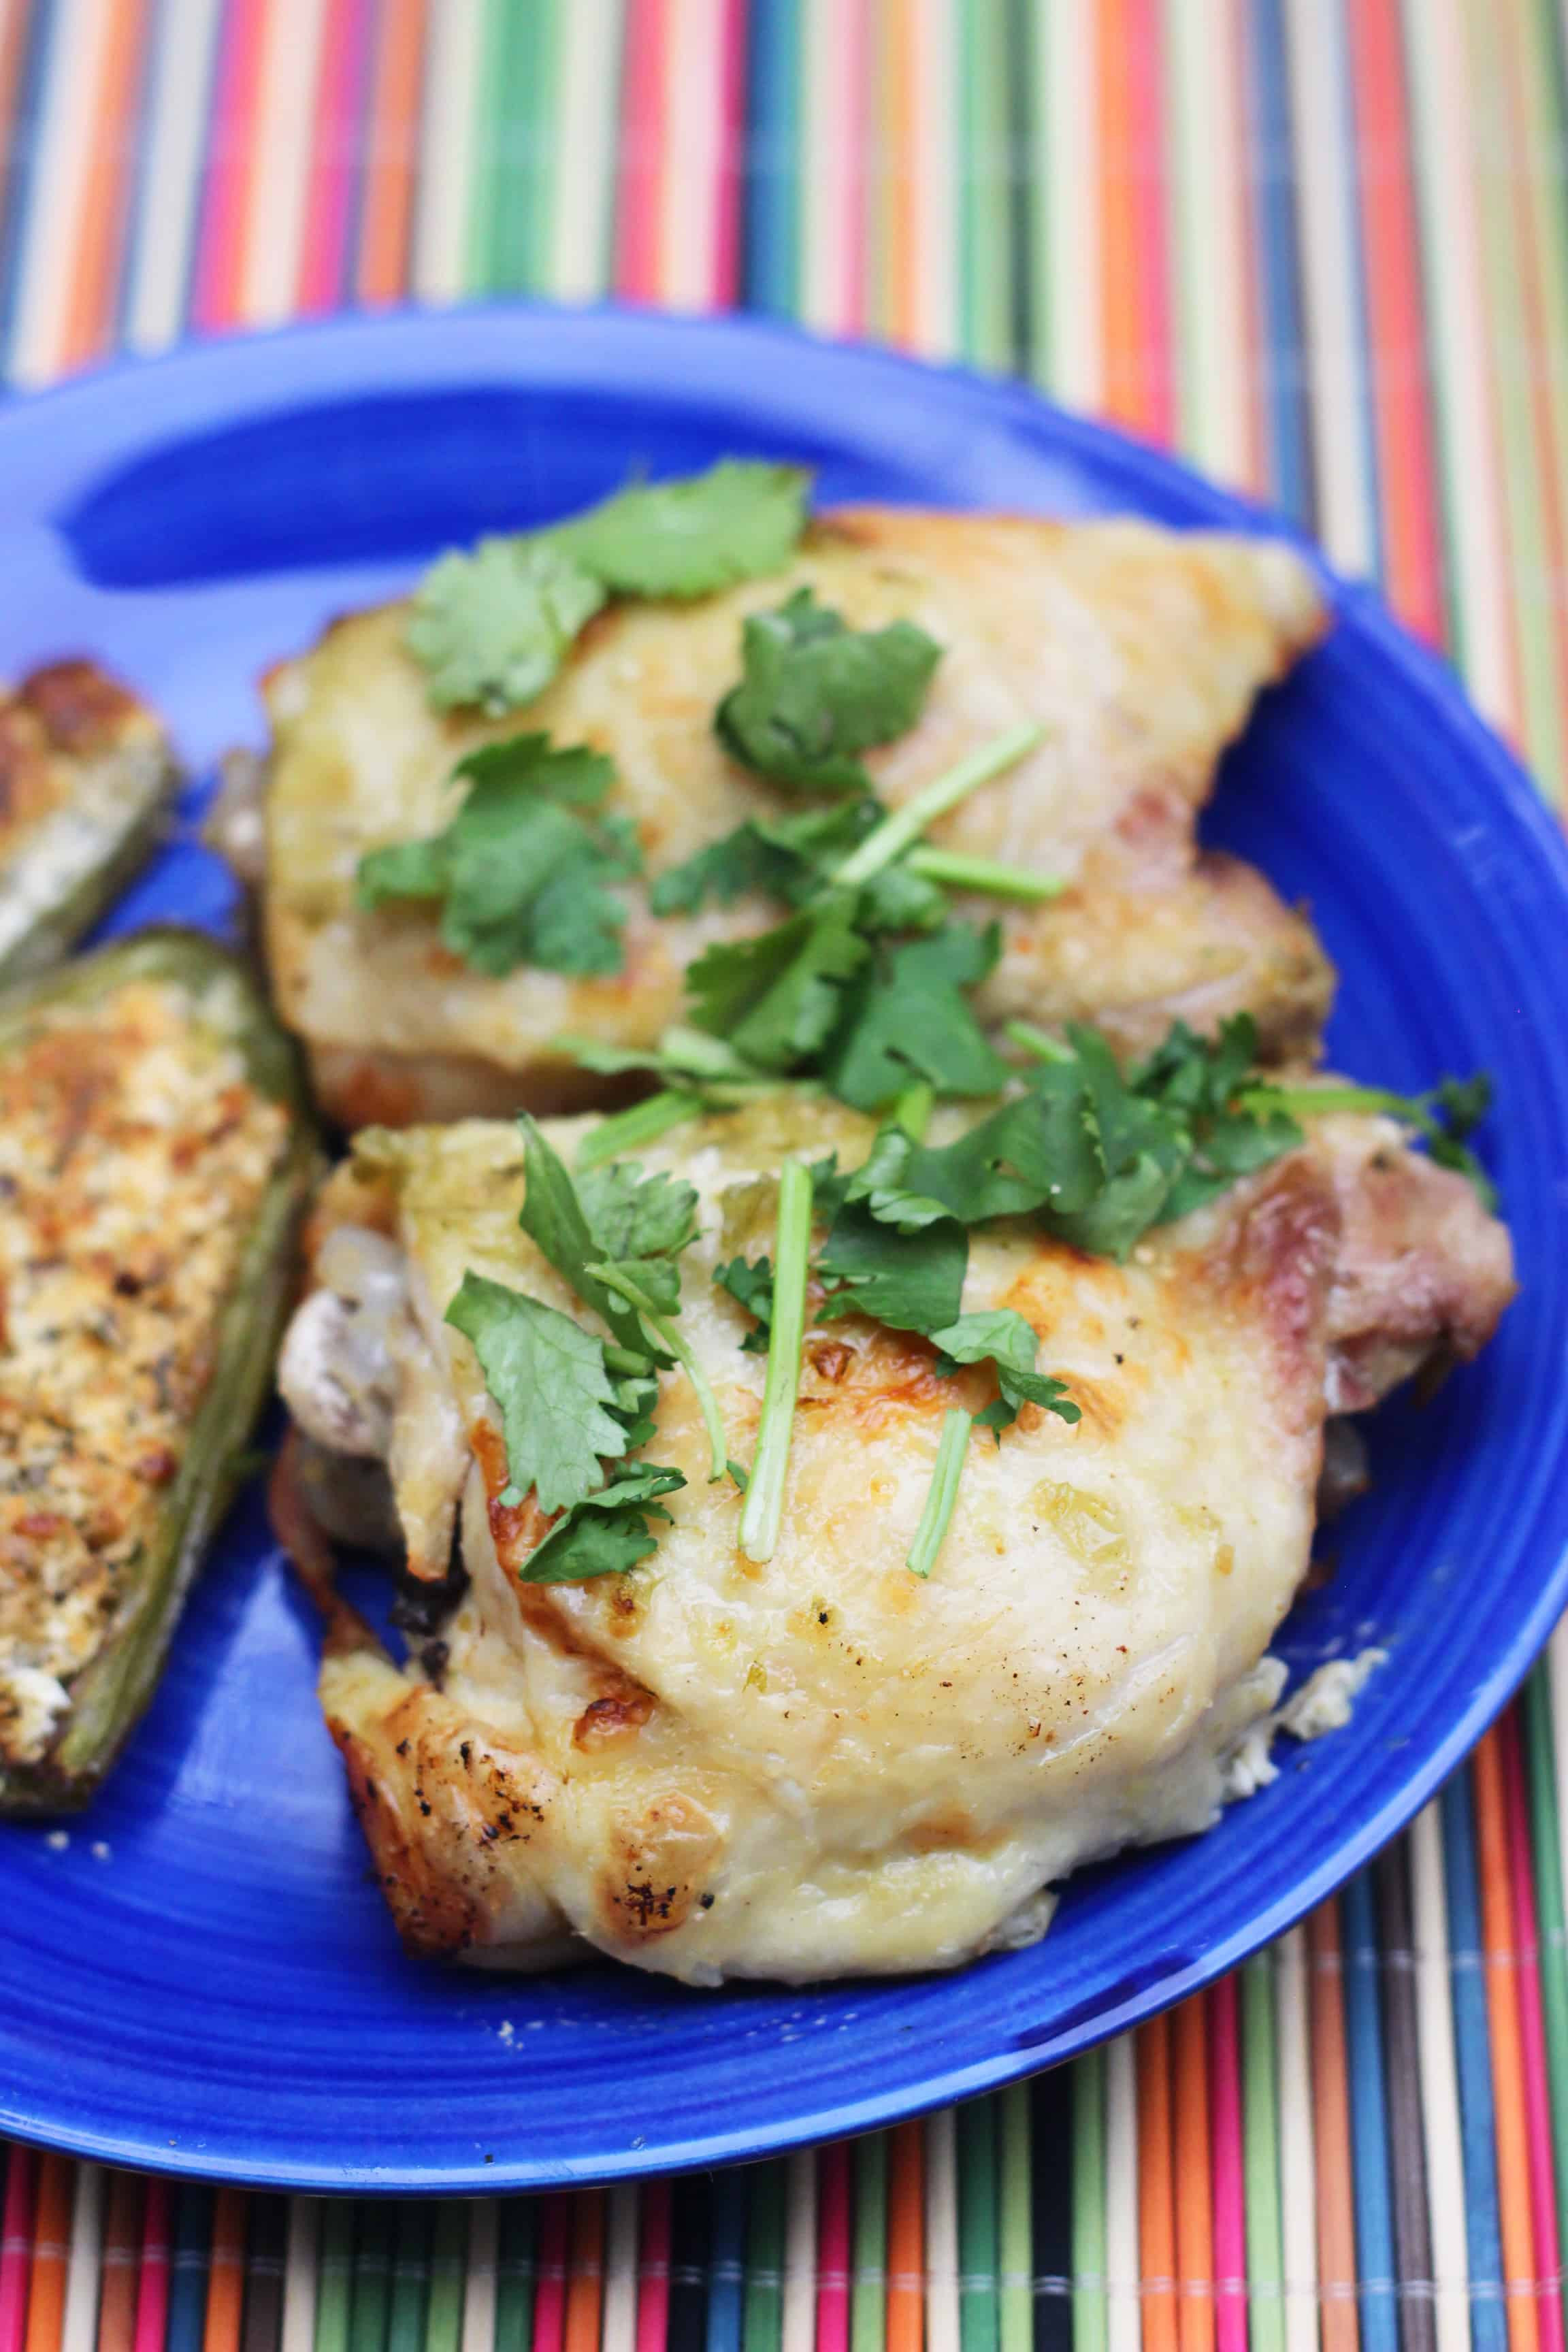 Keto Chicken Thighs Instant Pot
 Keto Instant Pot Chicken Thighs Done in 30 Minutes